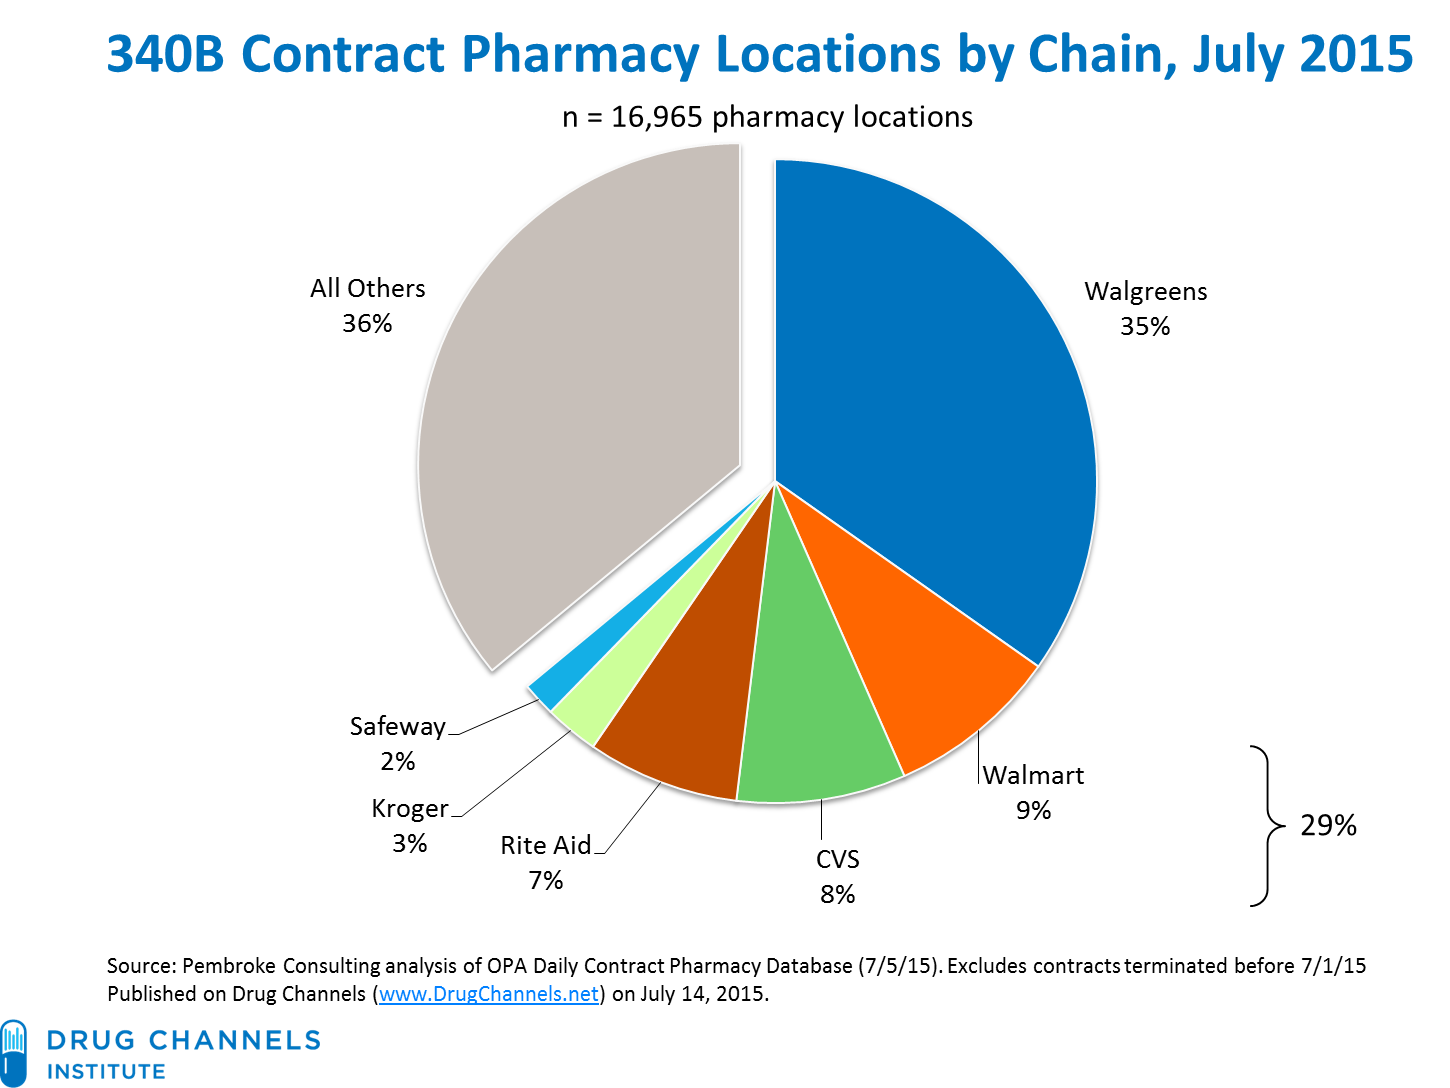 Drug Channels: More than One in Four U.S. Pharmacies is Now a 340B Contract Pharmacy; Walgreens ...